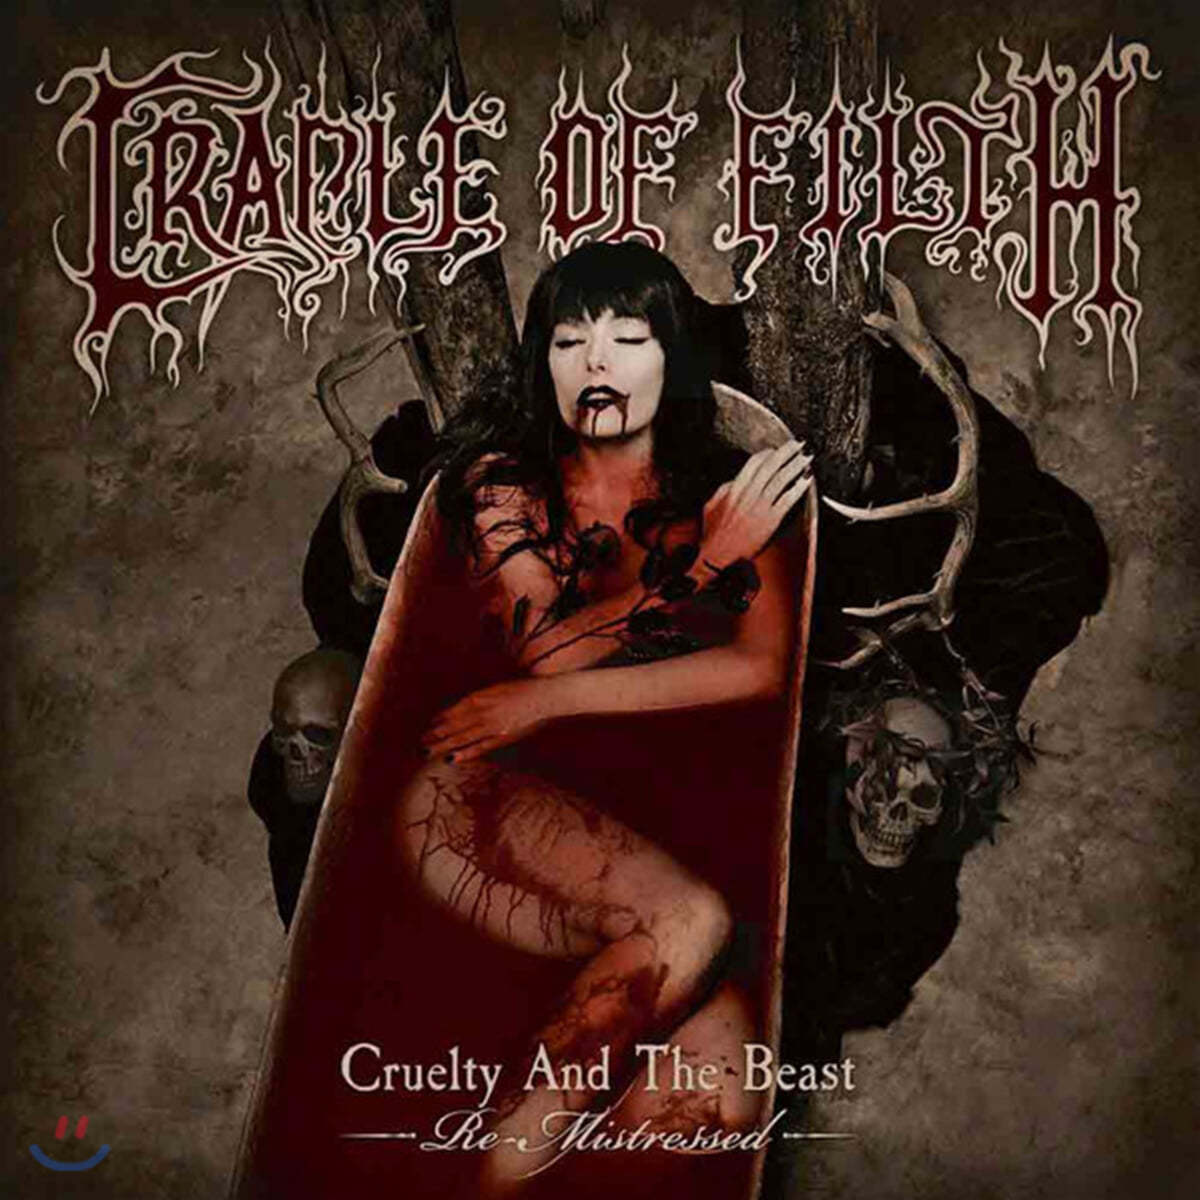 Cradle Of Filth (크레이들 오브 필스) - Cruelty And The Beast - Re-Mistressed [2LP]